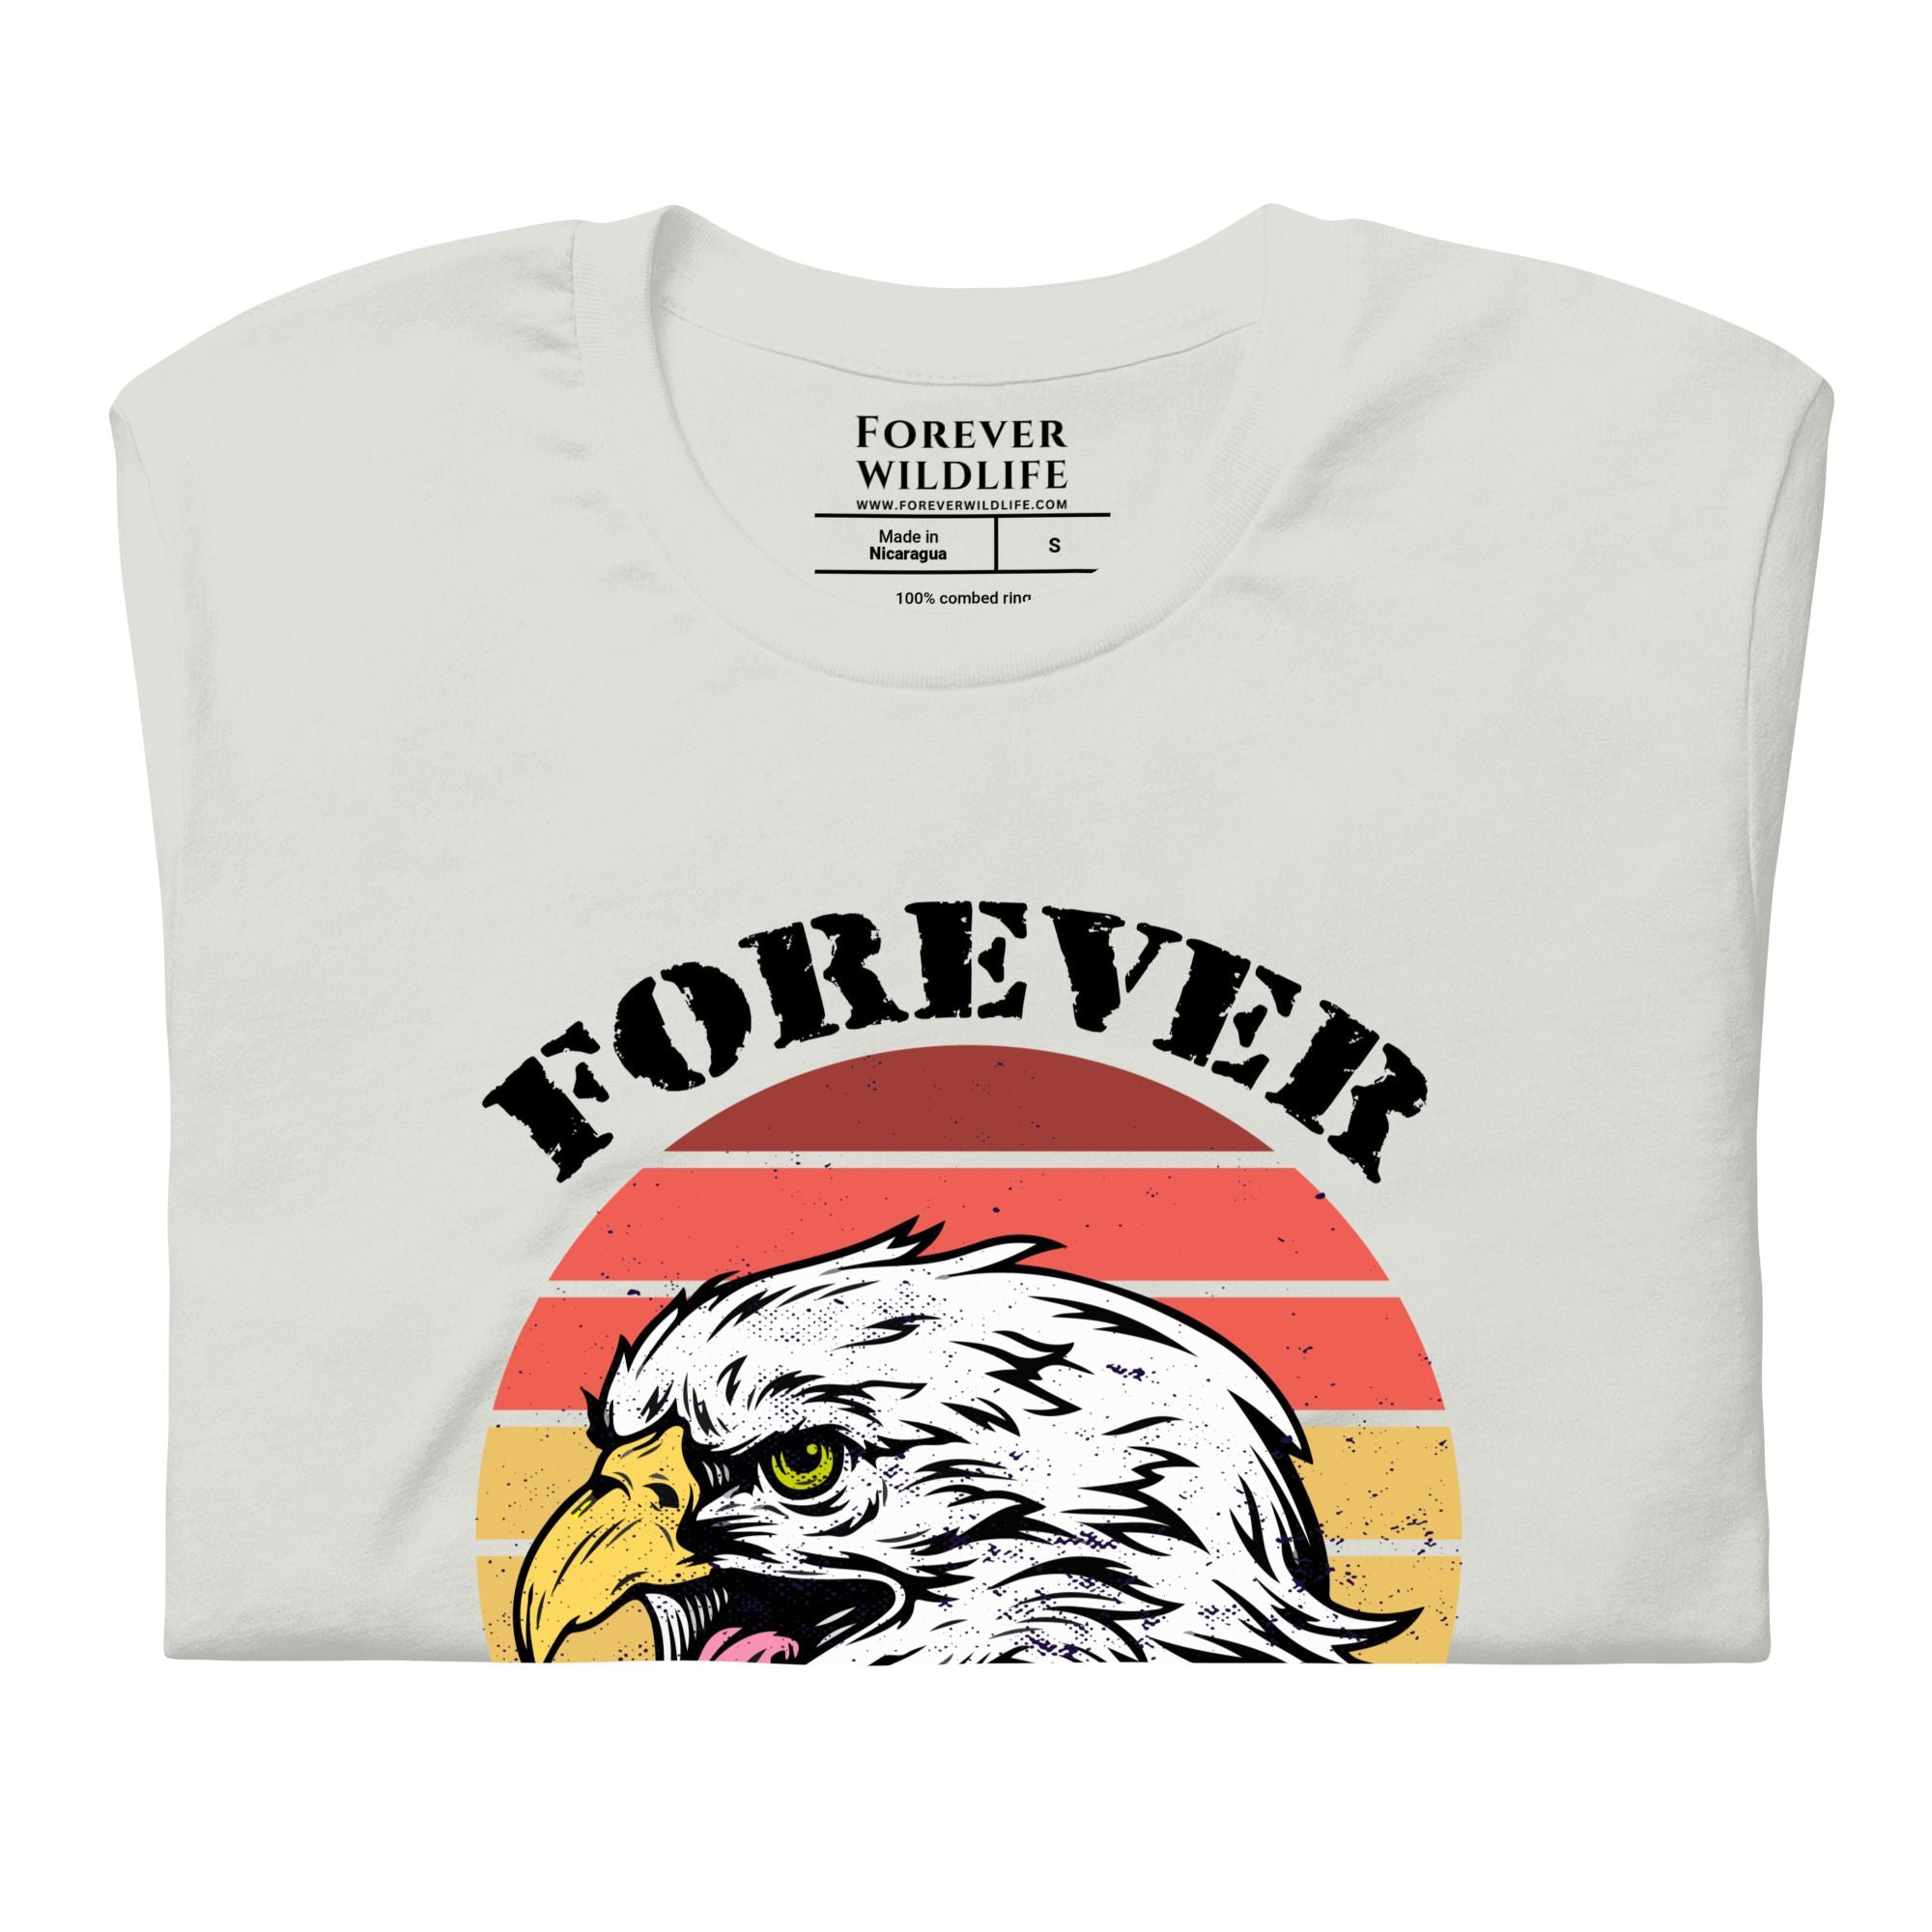 Eagle T-Shirt in Silver – Premium Wildlife T-Shirt Design, Eagle Shirts and Wildlife Apparel from Forever Wildlife